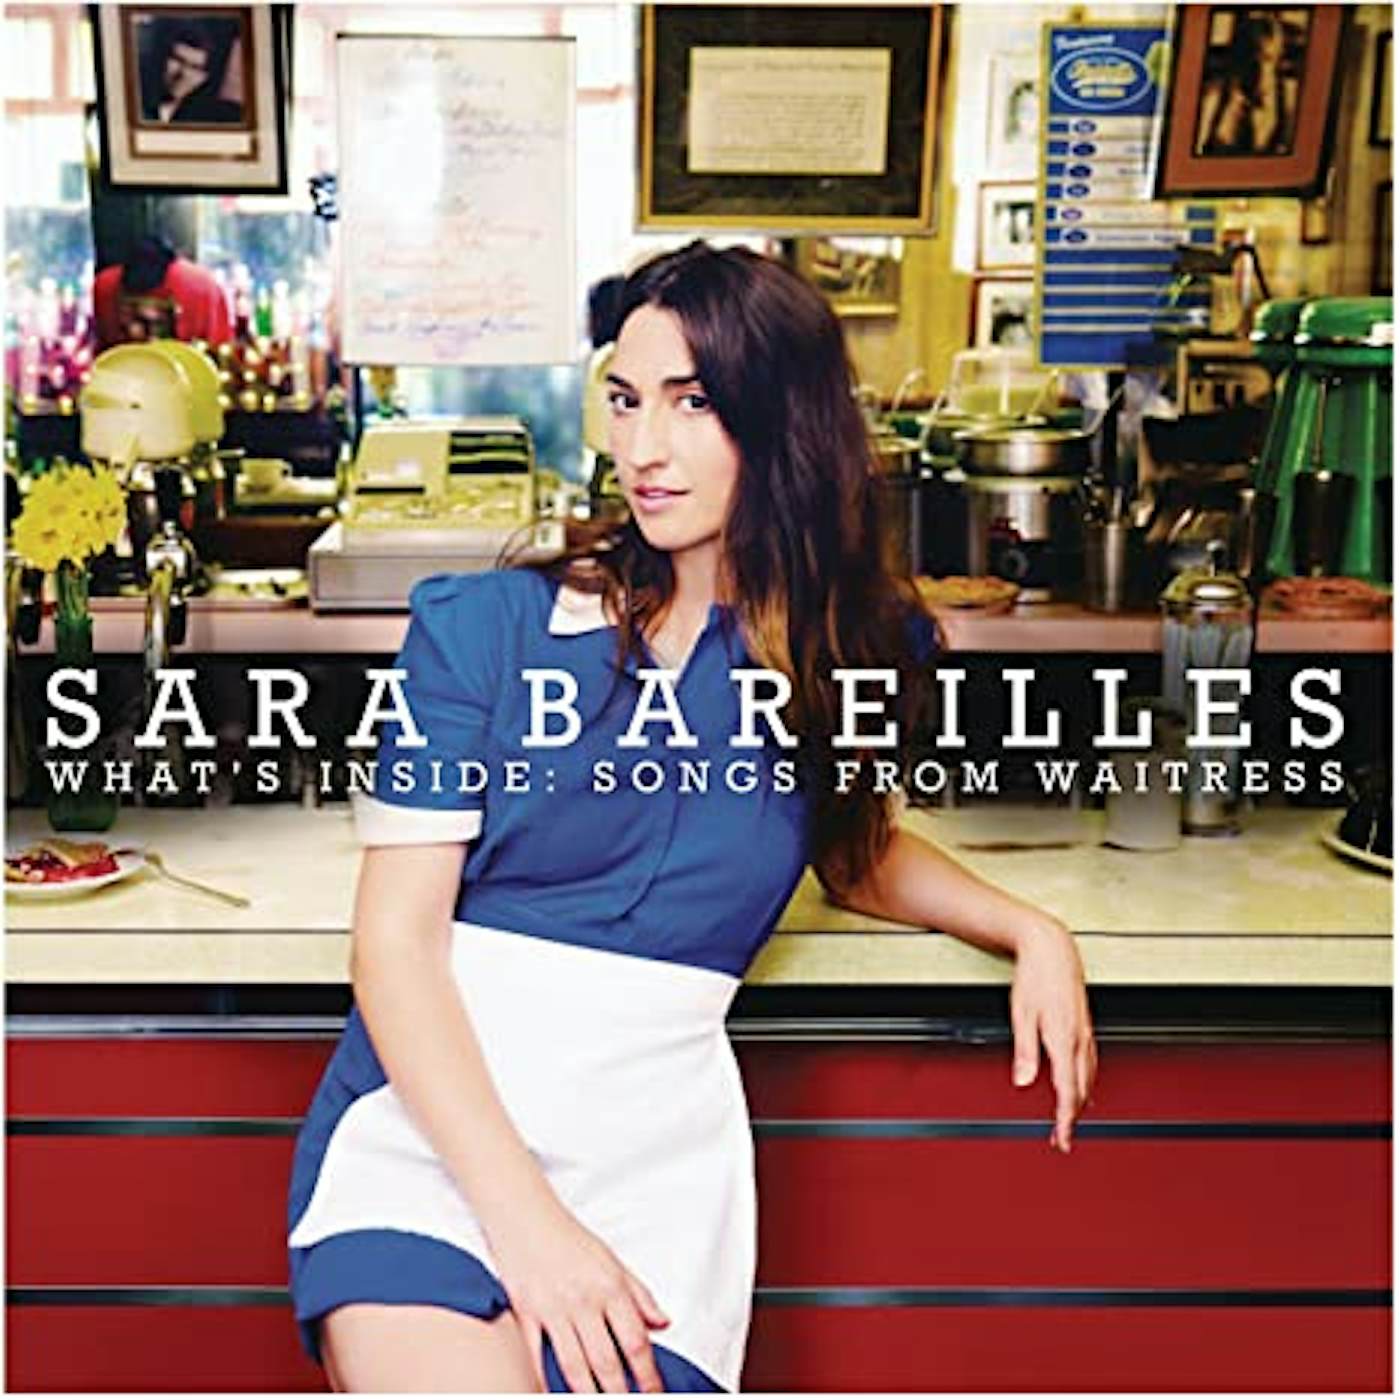 Sara Bareilles WHAT'S INSIDE: SONGS FROM WAITRESS Vinyl Record - Canada Release